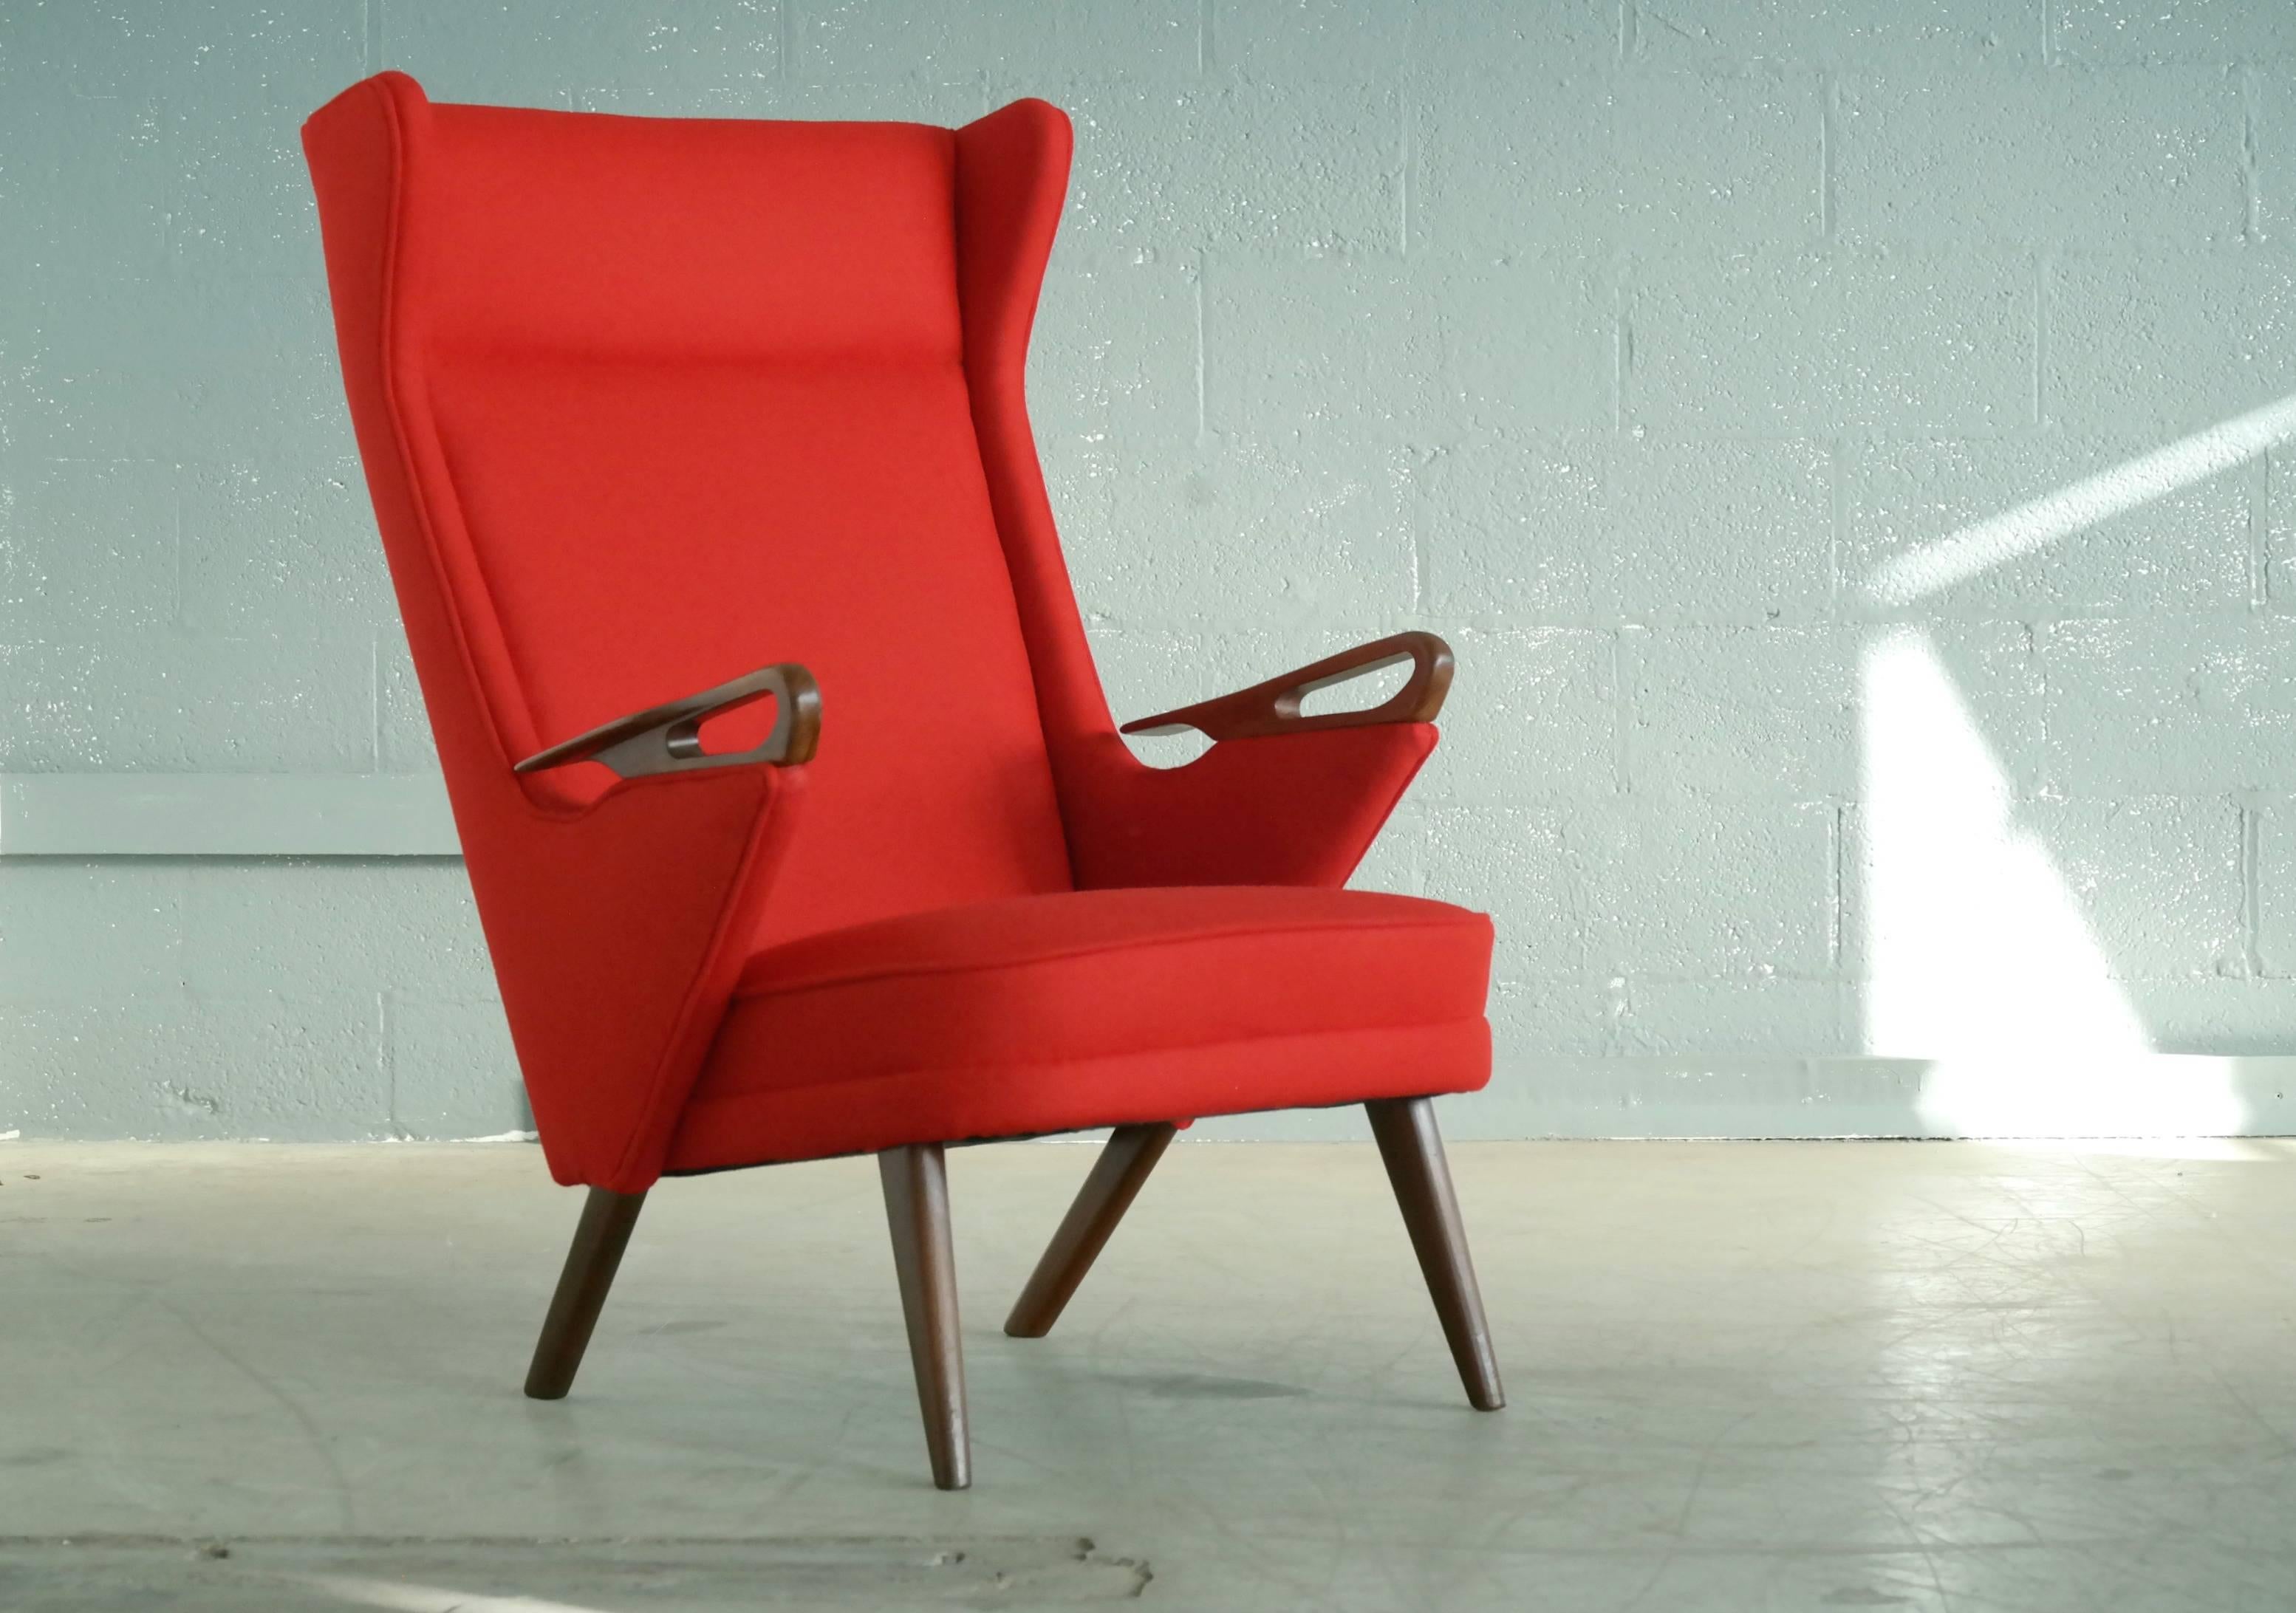 Rare and simply fantastic 1950s lounge chair by Chresten Findahl Brodersen. While this chair share some of the same straight lines and stance as Wegner's Papa Bear this has a lighter and more dynamic design expression along with the most beautifully